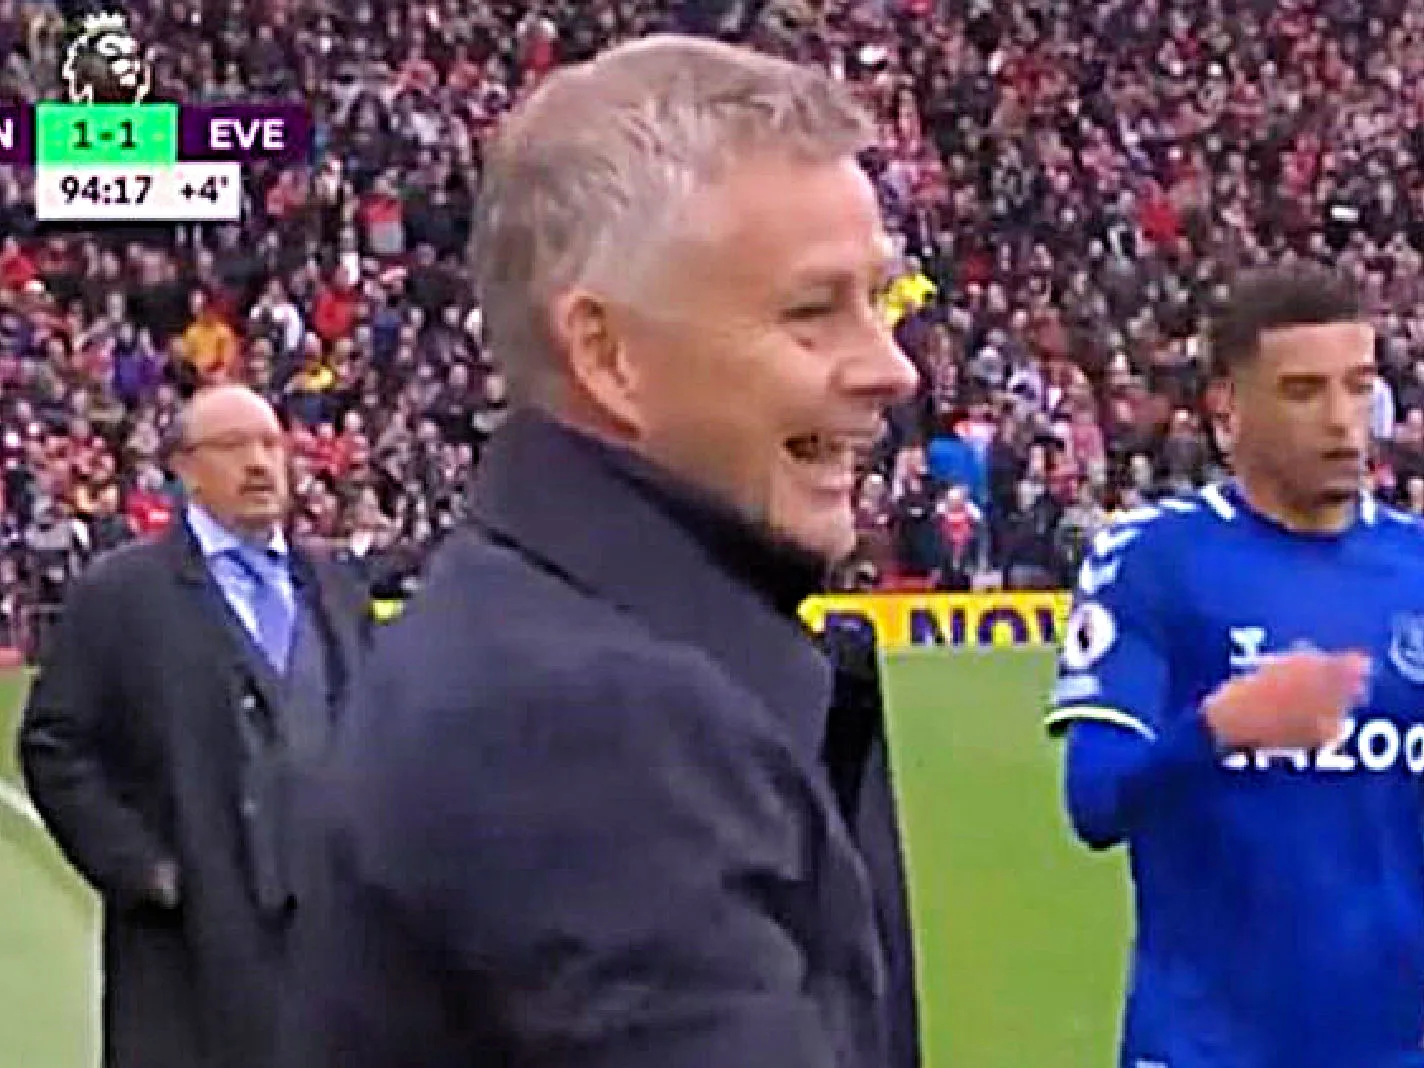 Solskjaer caught smiling in the 94th minute of Everton draw